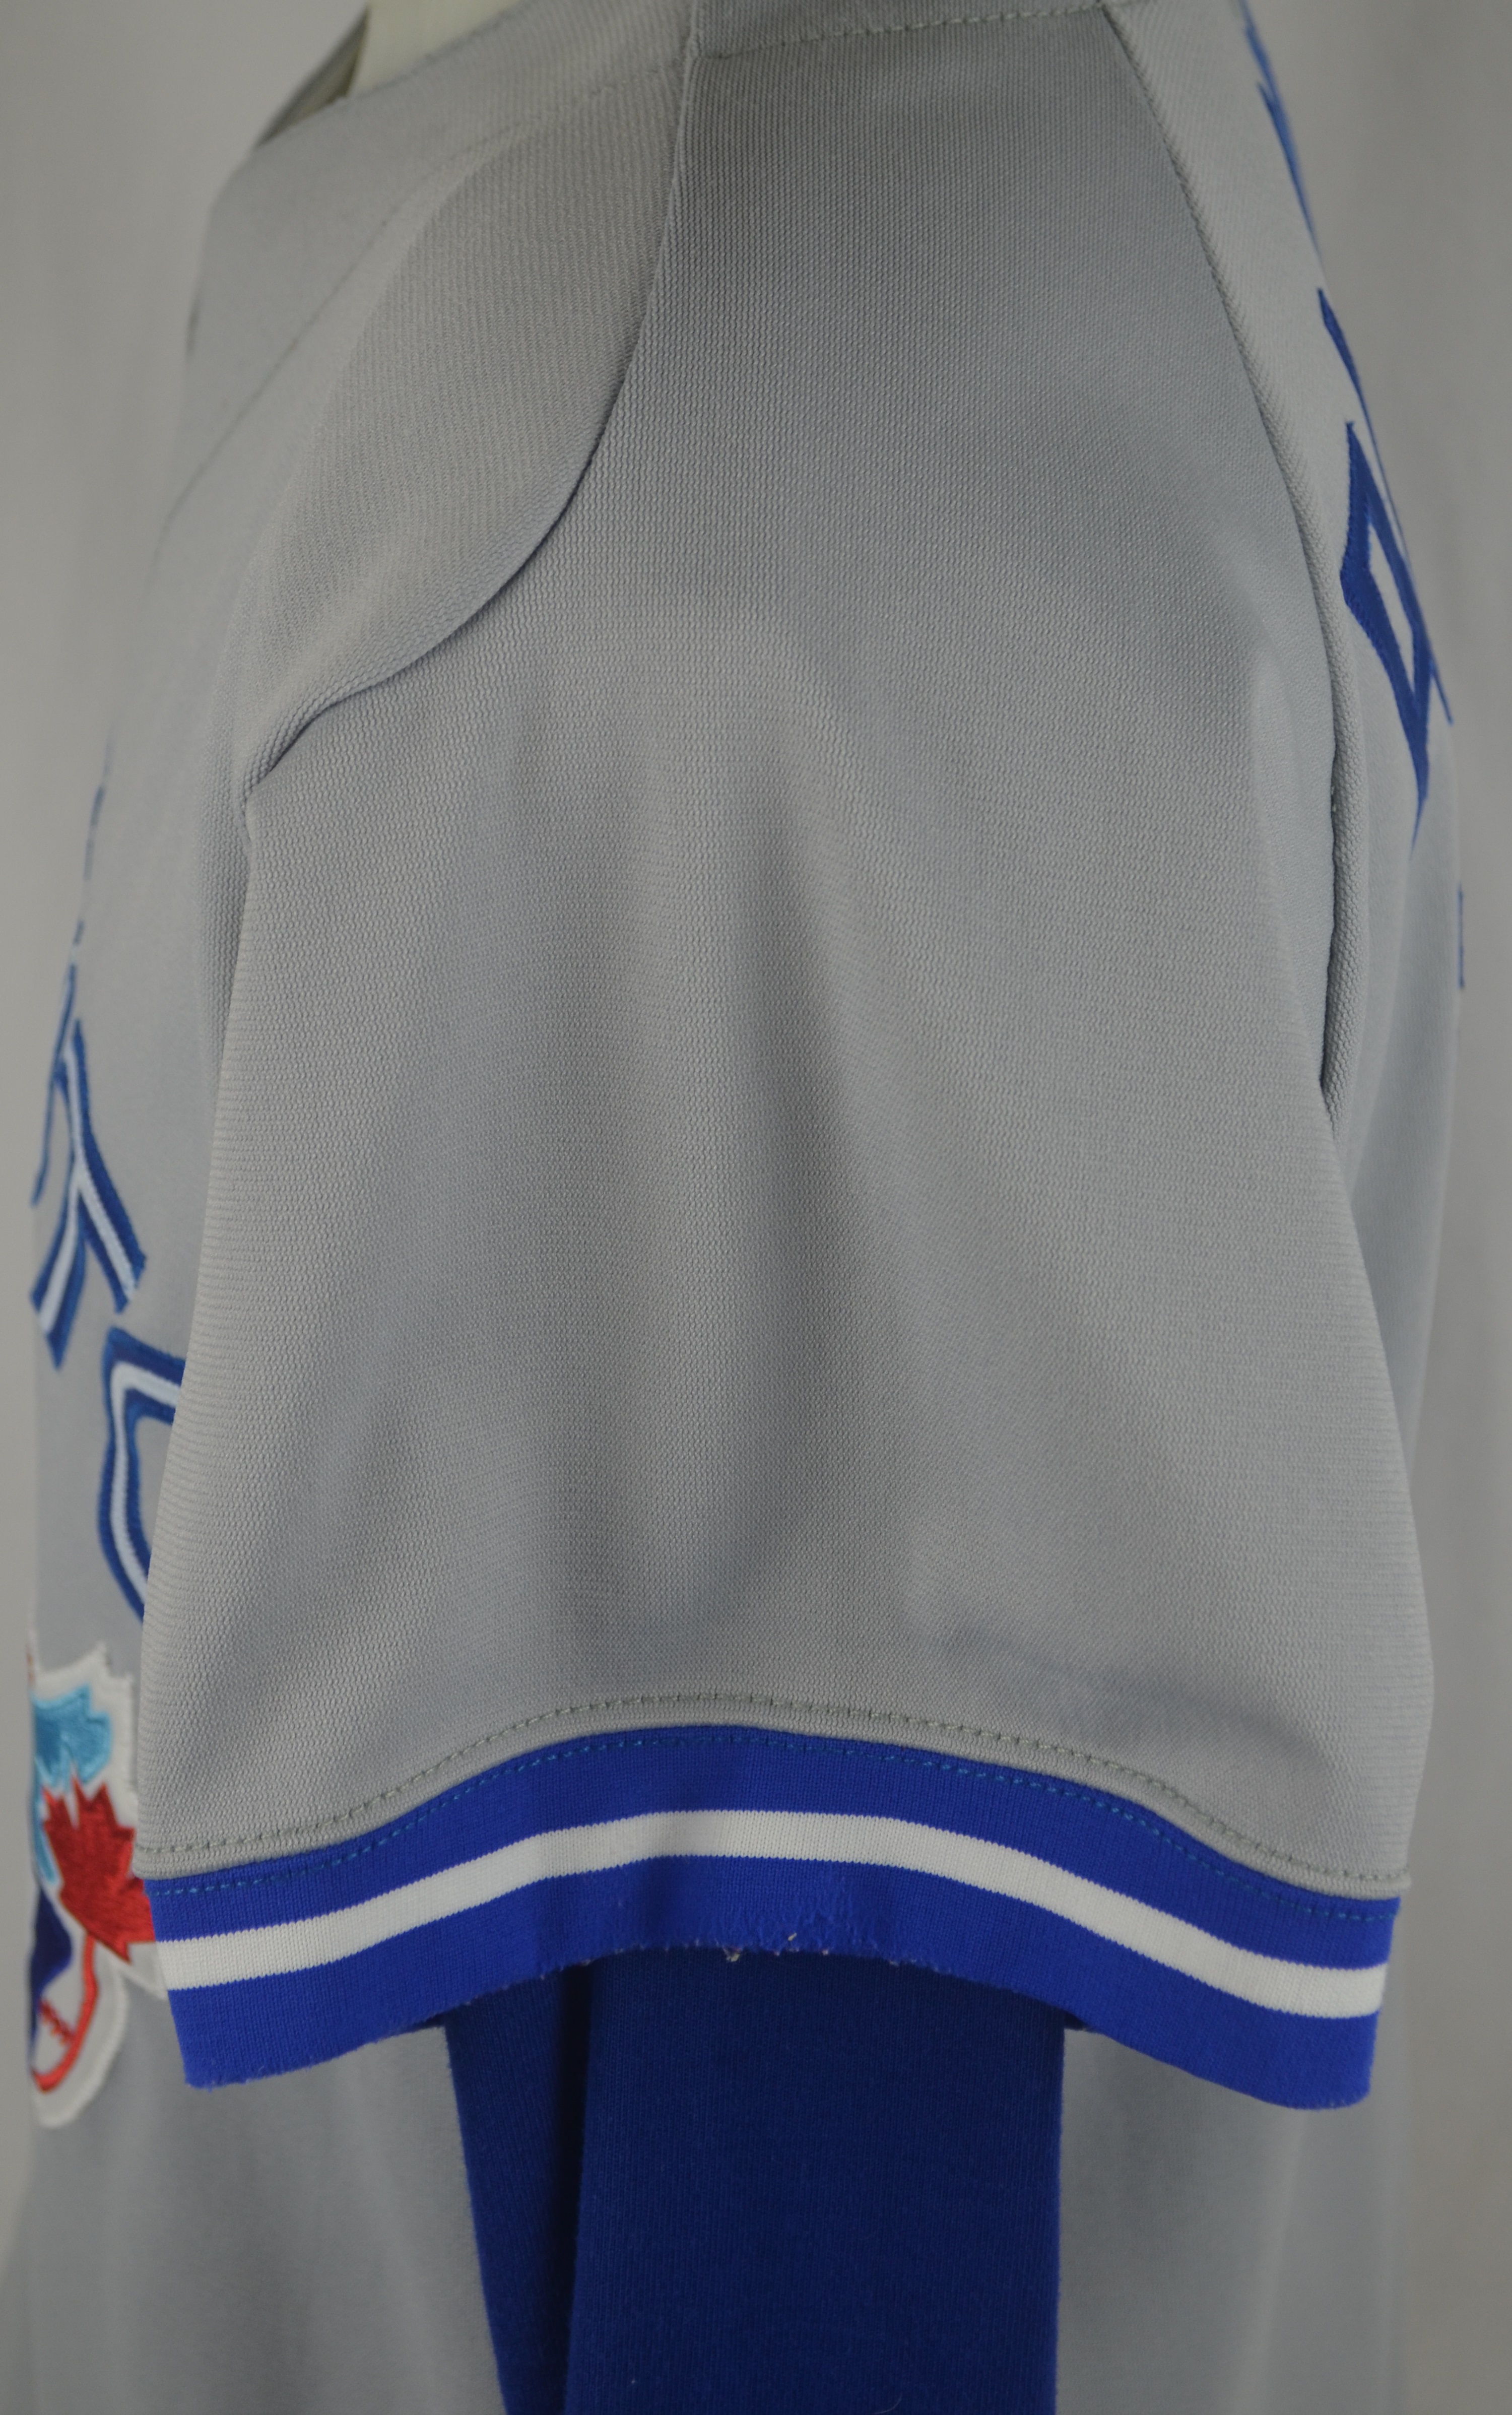 Roberto Alomar NWT NEW Blue Jays White Majestic Baseball Jersey Size LG  144265 at 's Sports Collectibles Store